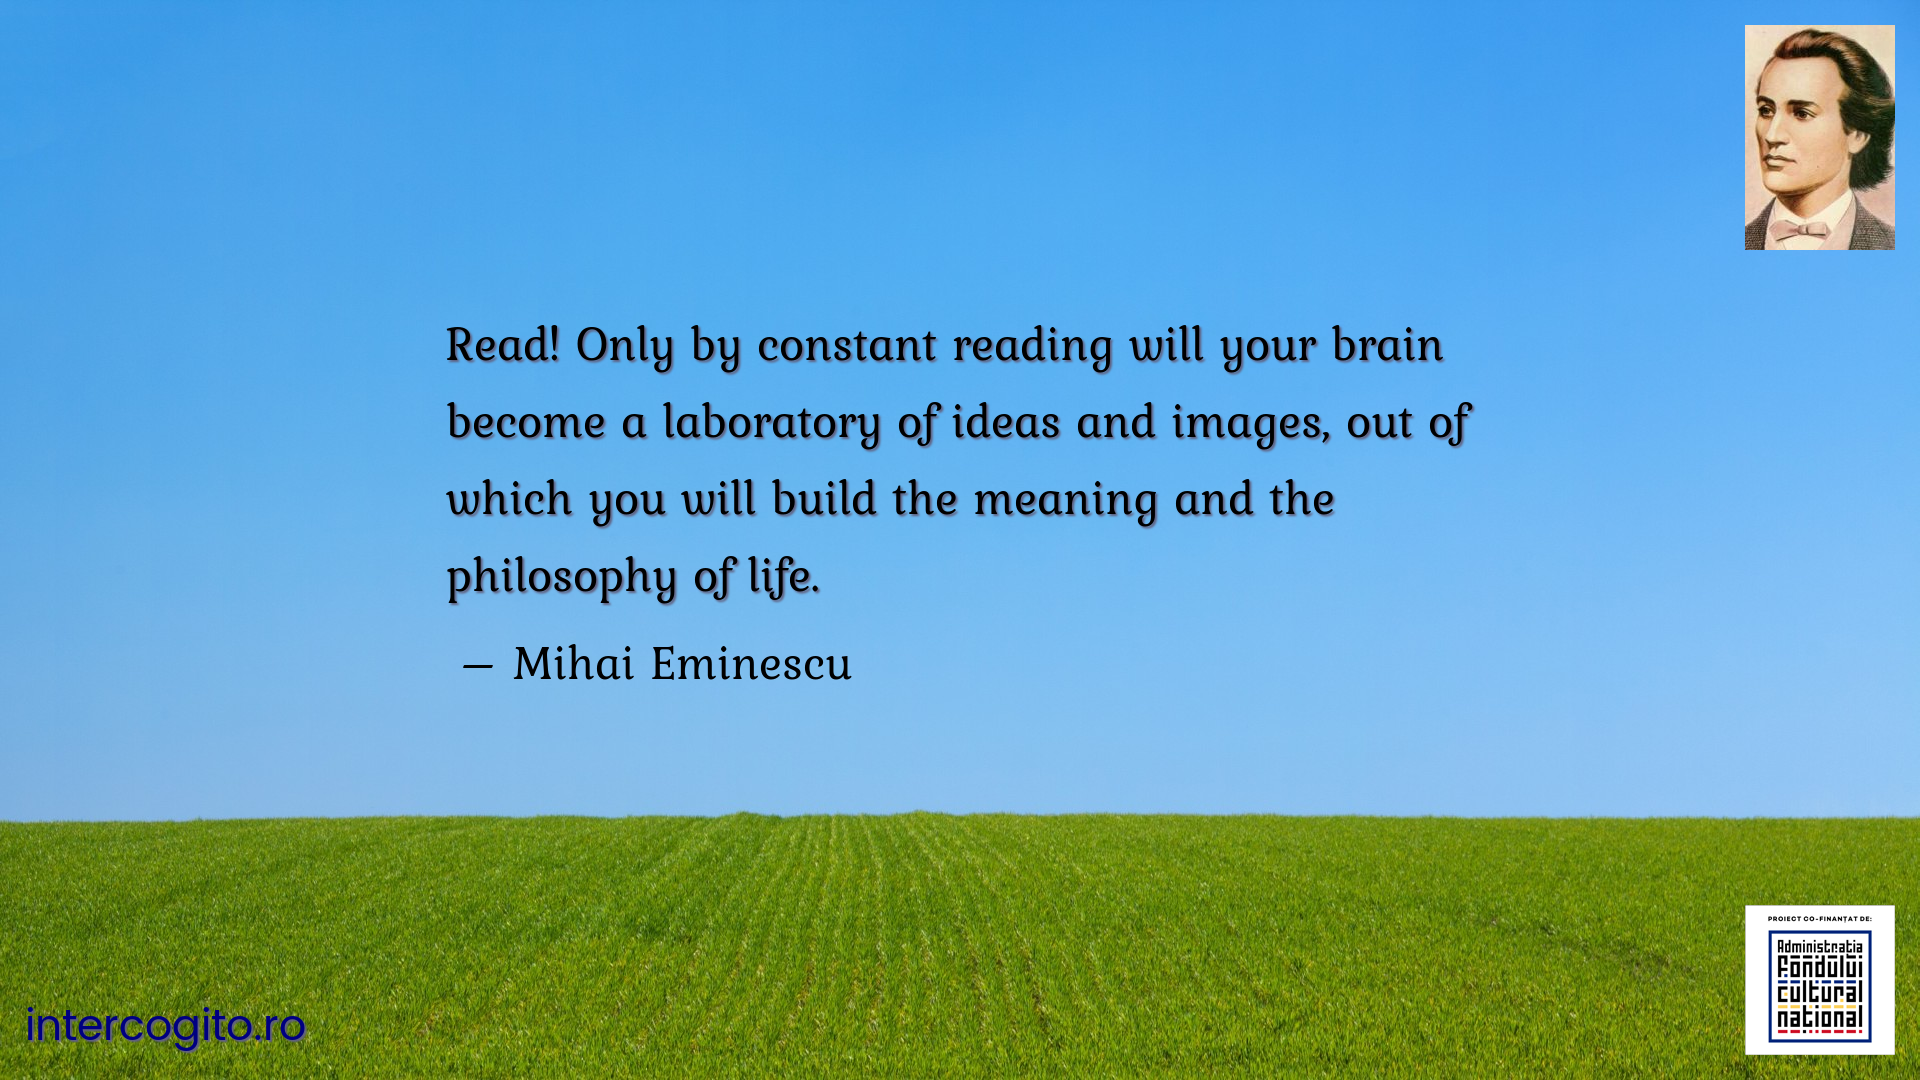 Read! Only by constant reading will your brain become a laboratory of ideas and images, out of which you will build the meaning and the philosophy of life.